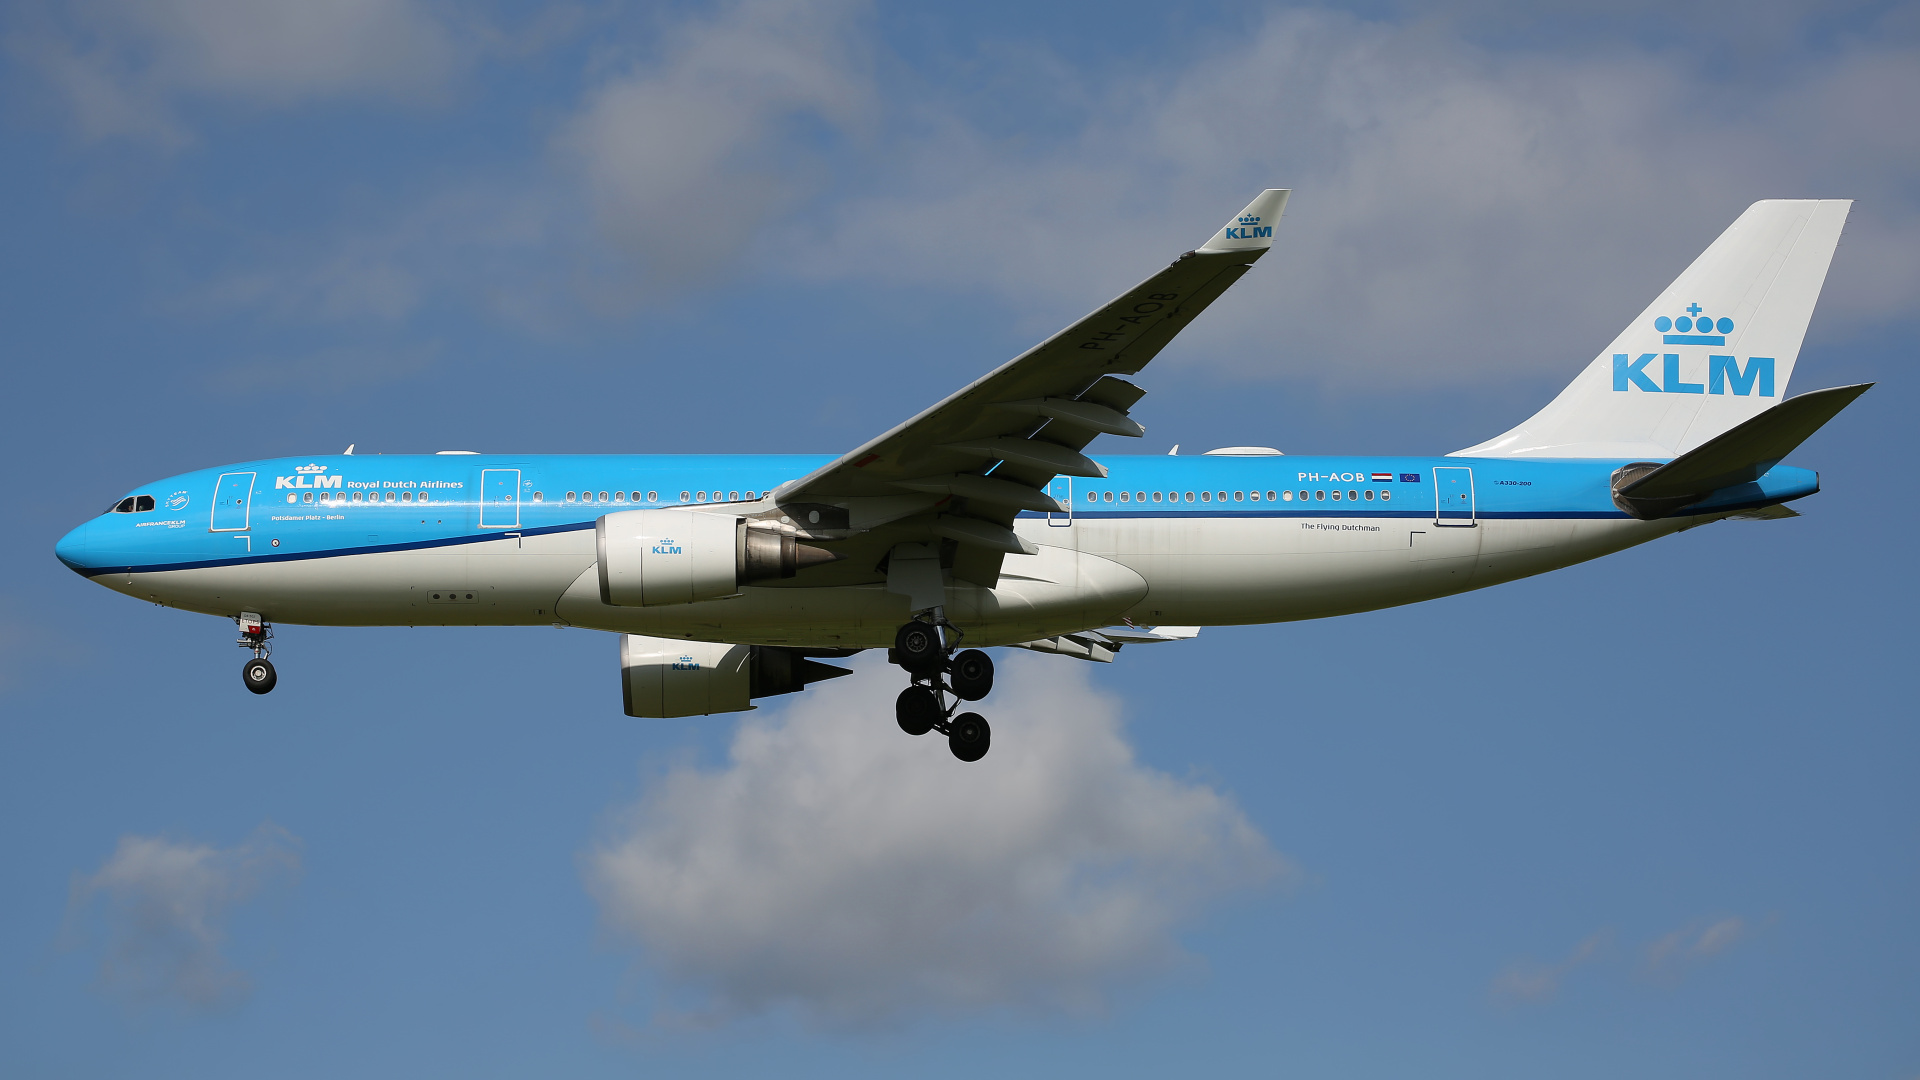 PH-AOB (new livery) (Aircraft » Schiphol Spotting » Airbus A330-200 » KLM Royal Dutch Airlines)